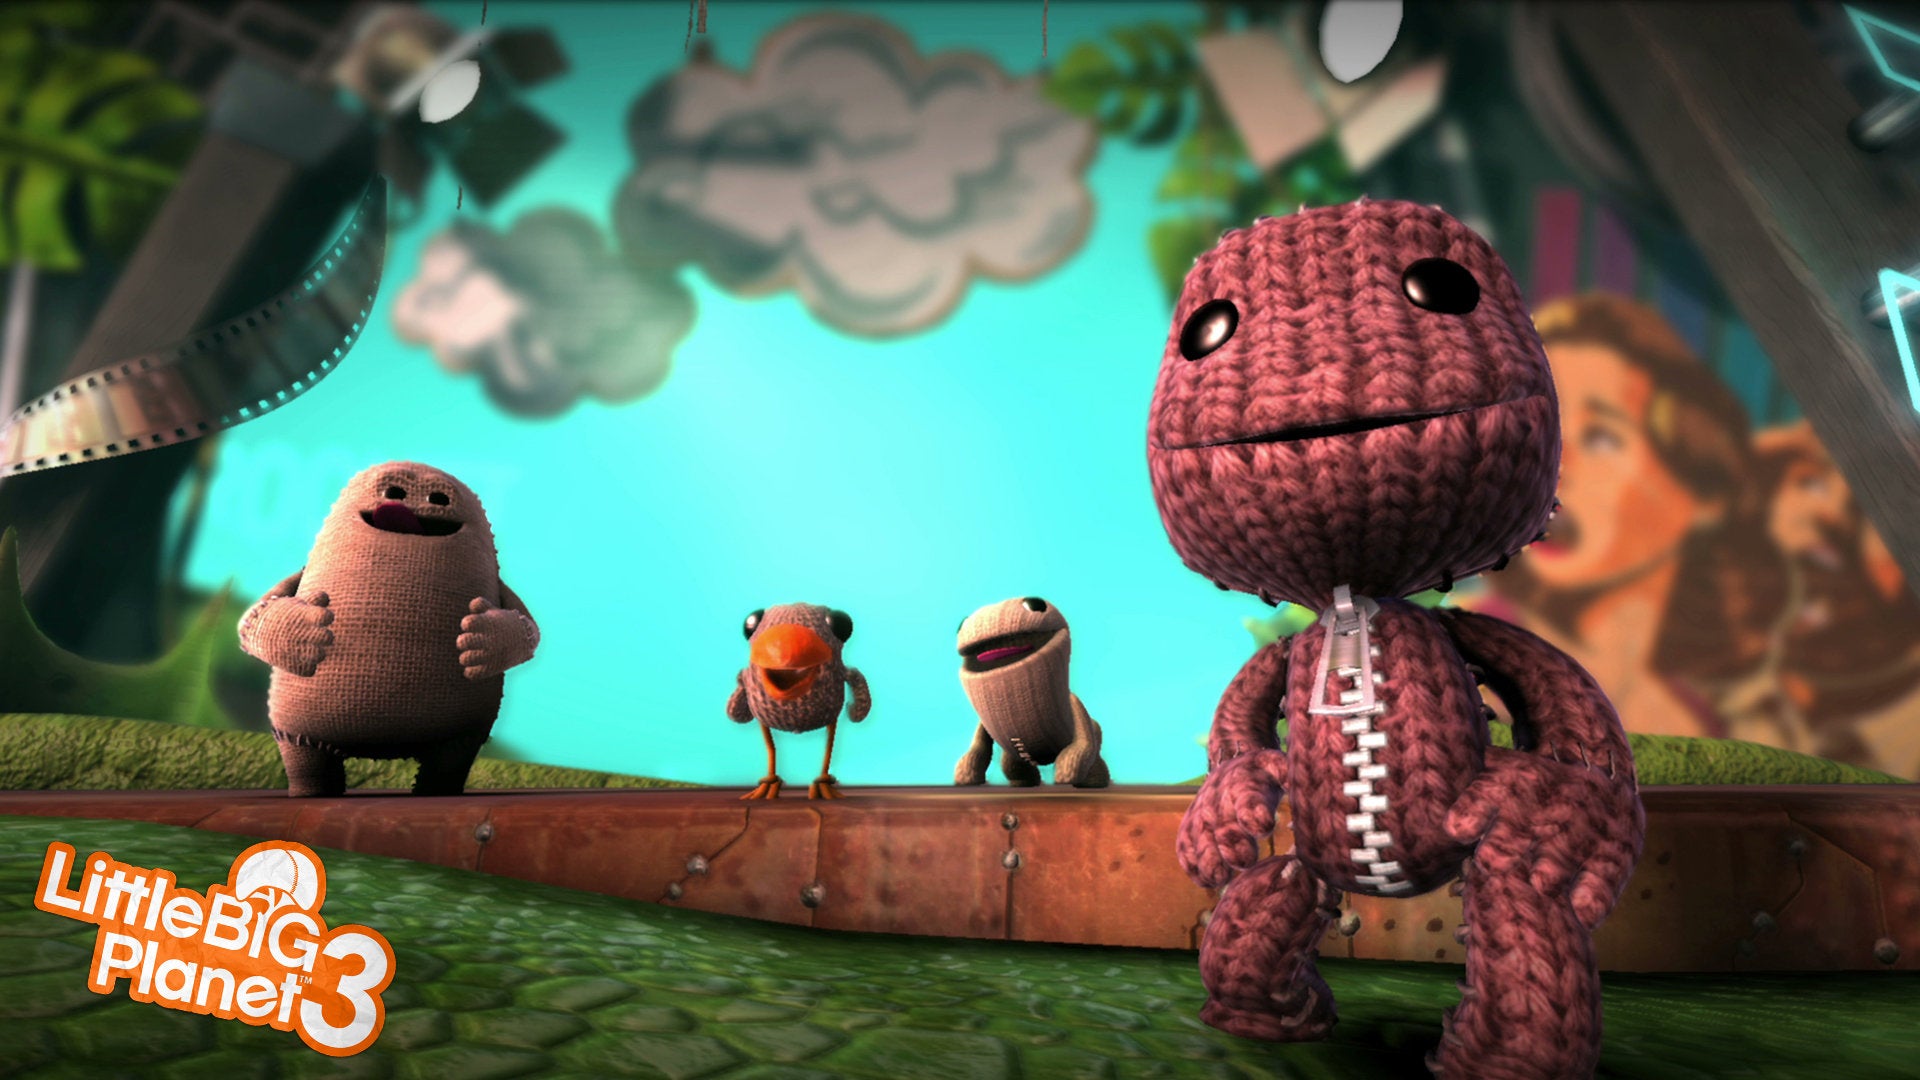 Image for Hear some familiar voices in LittleBigPlanet 3